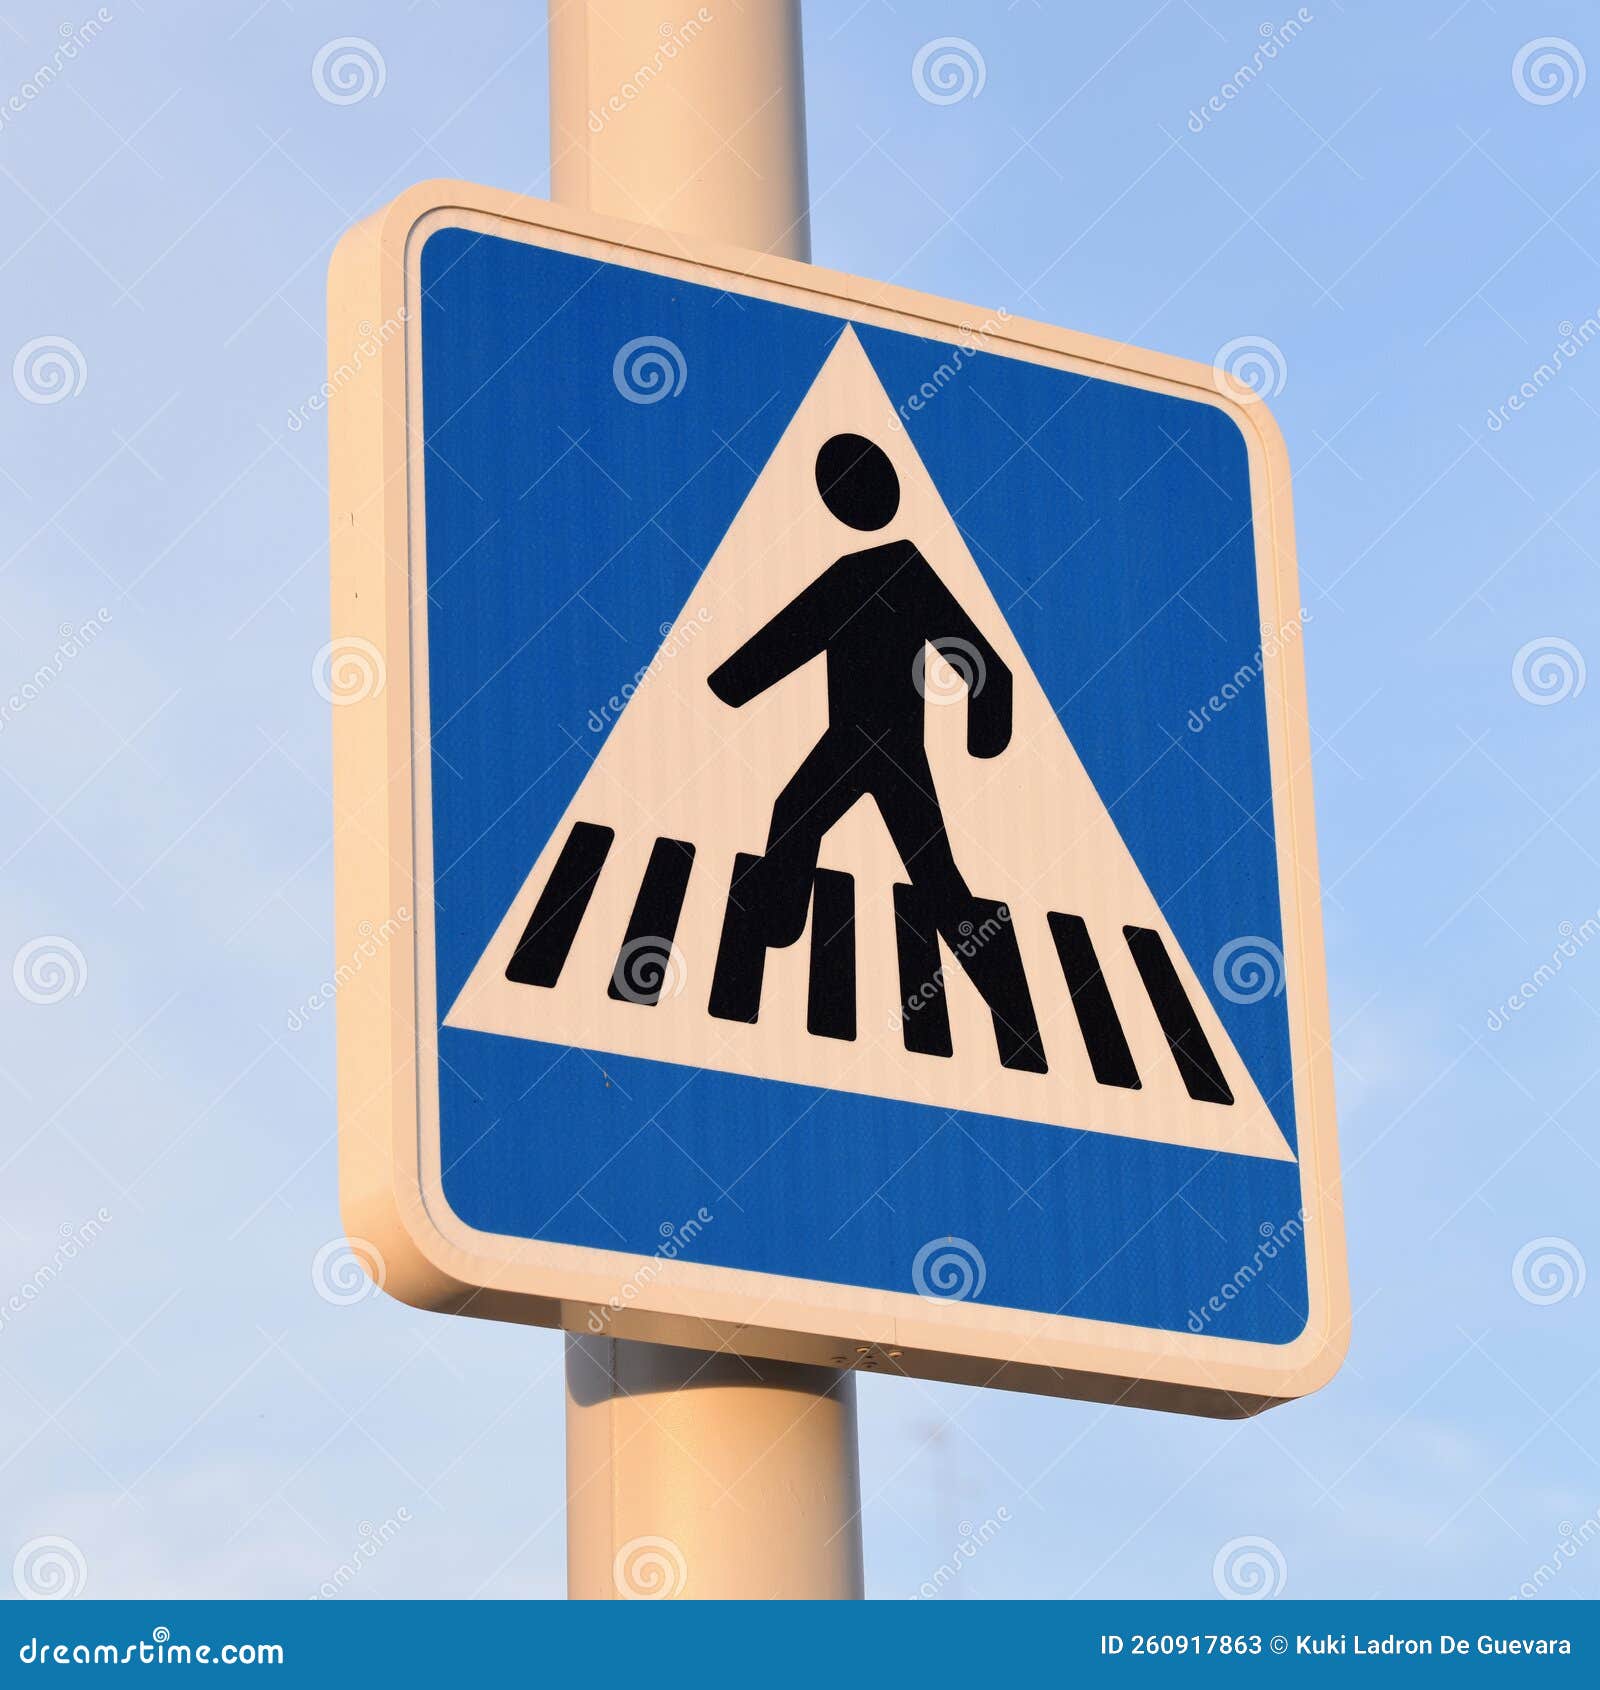 detail of a pedestrian and bicycle crossing signal